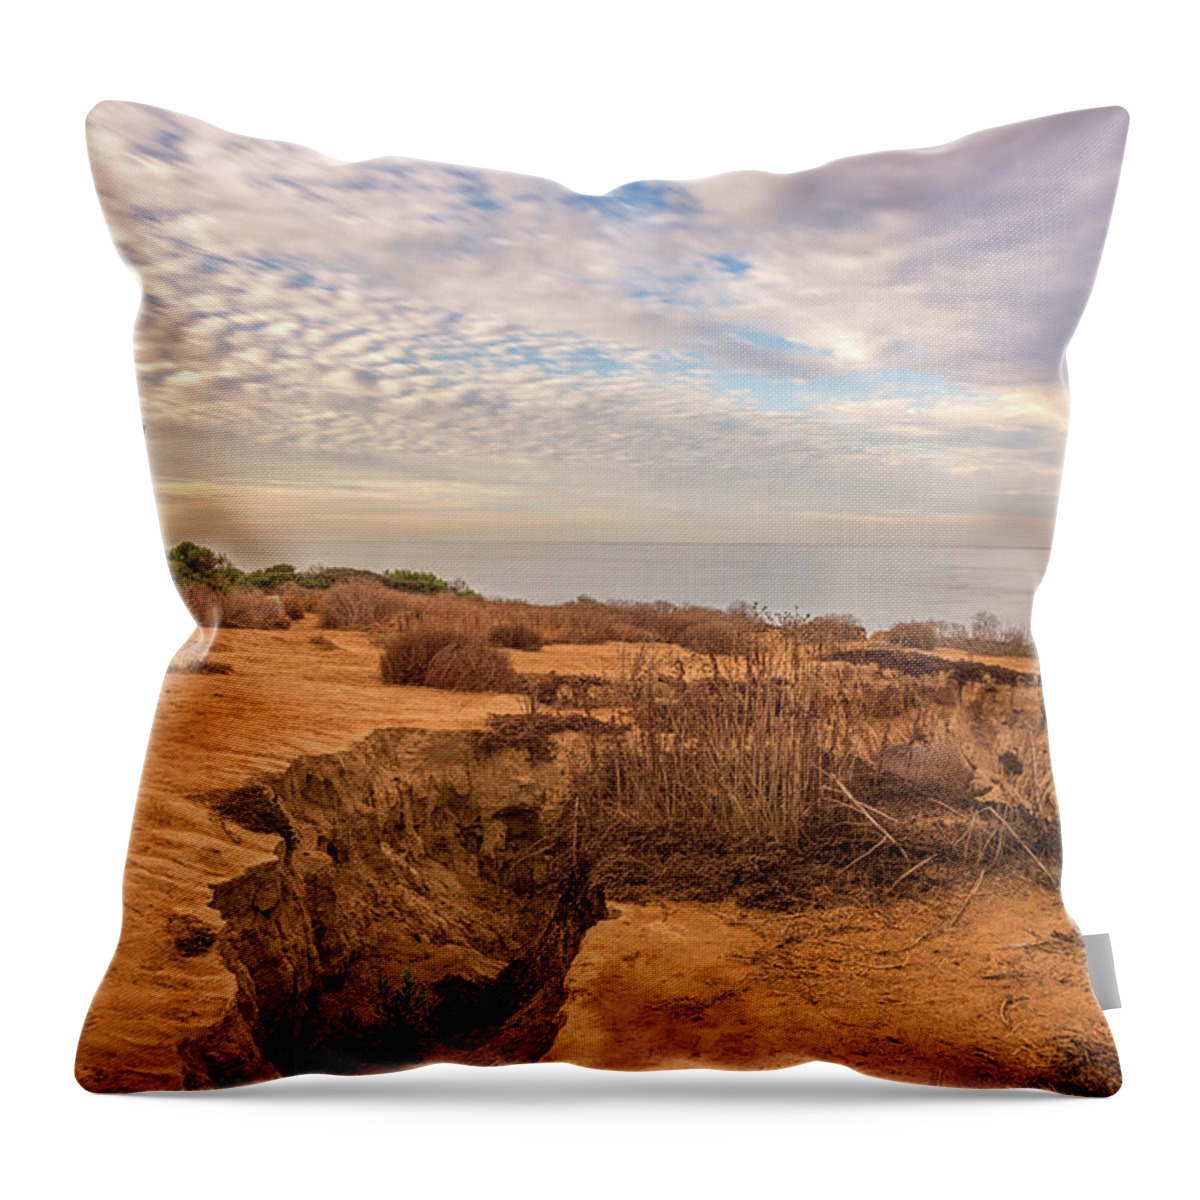 San Diego Throw Pillow featuring the photograph Bronze Coast by Joseph S Giacalone